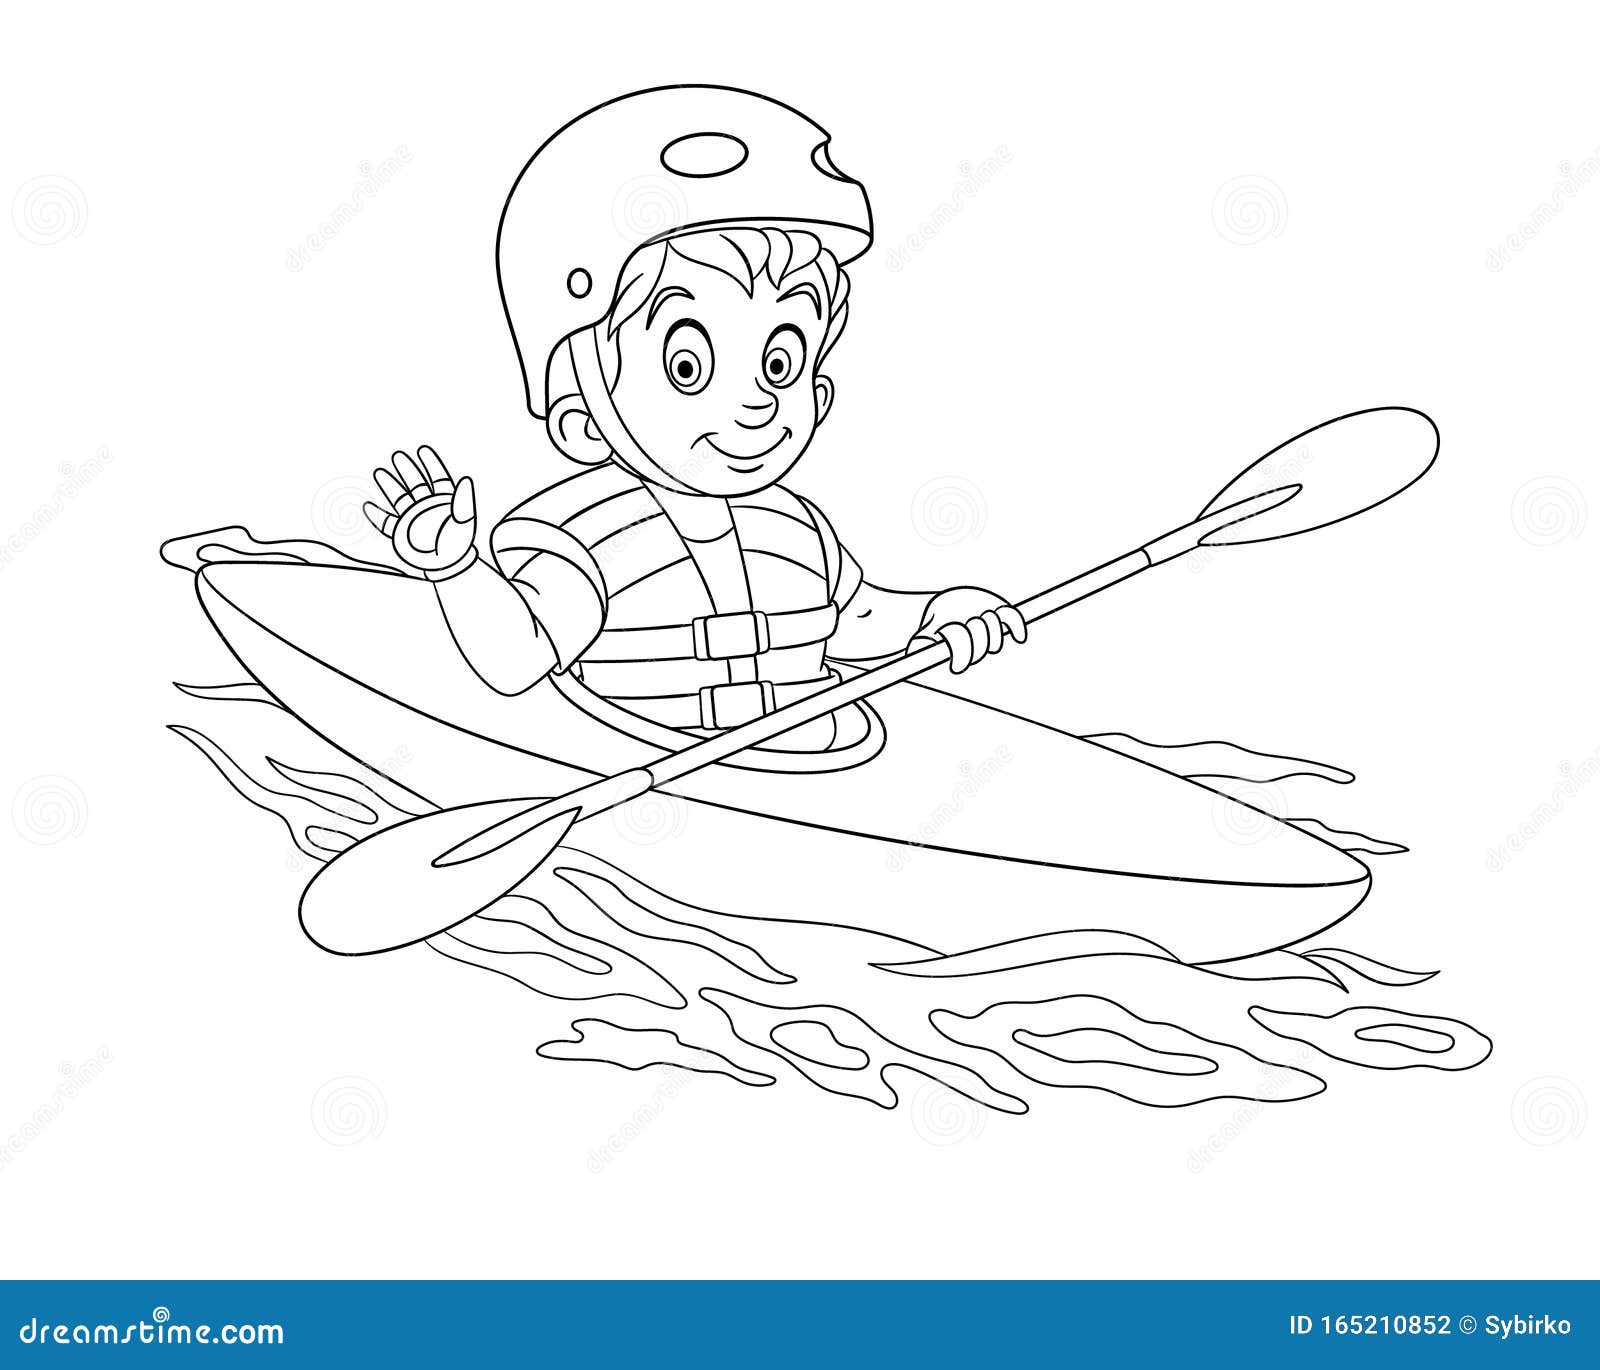 Coloring page with boy canoeing extreme sport kayaking stock vector